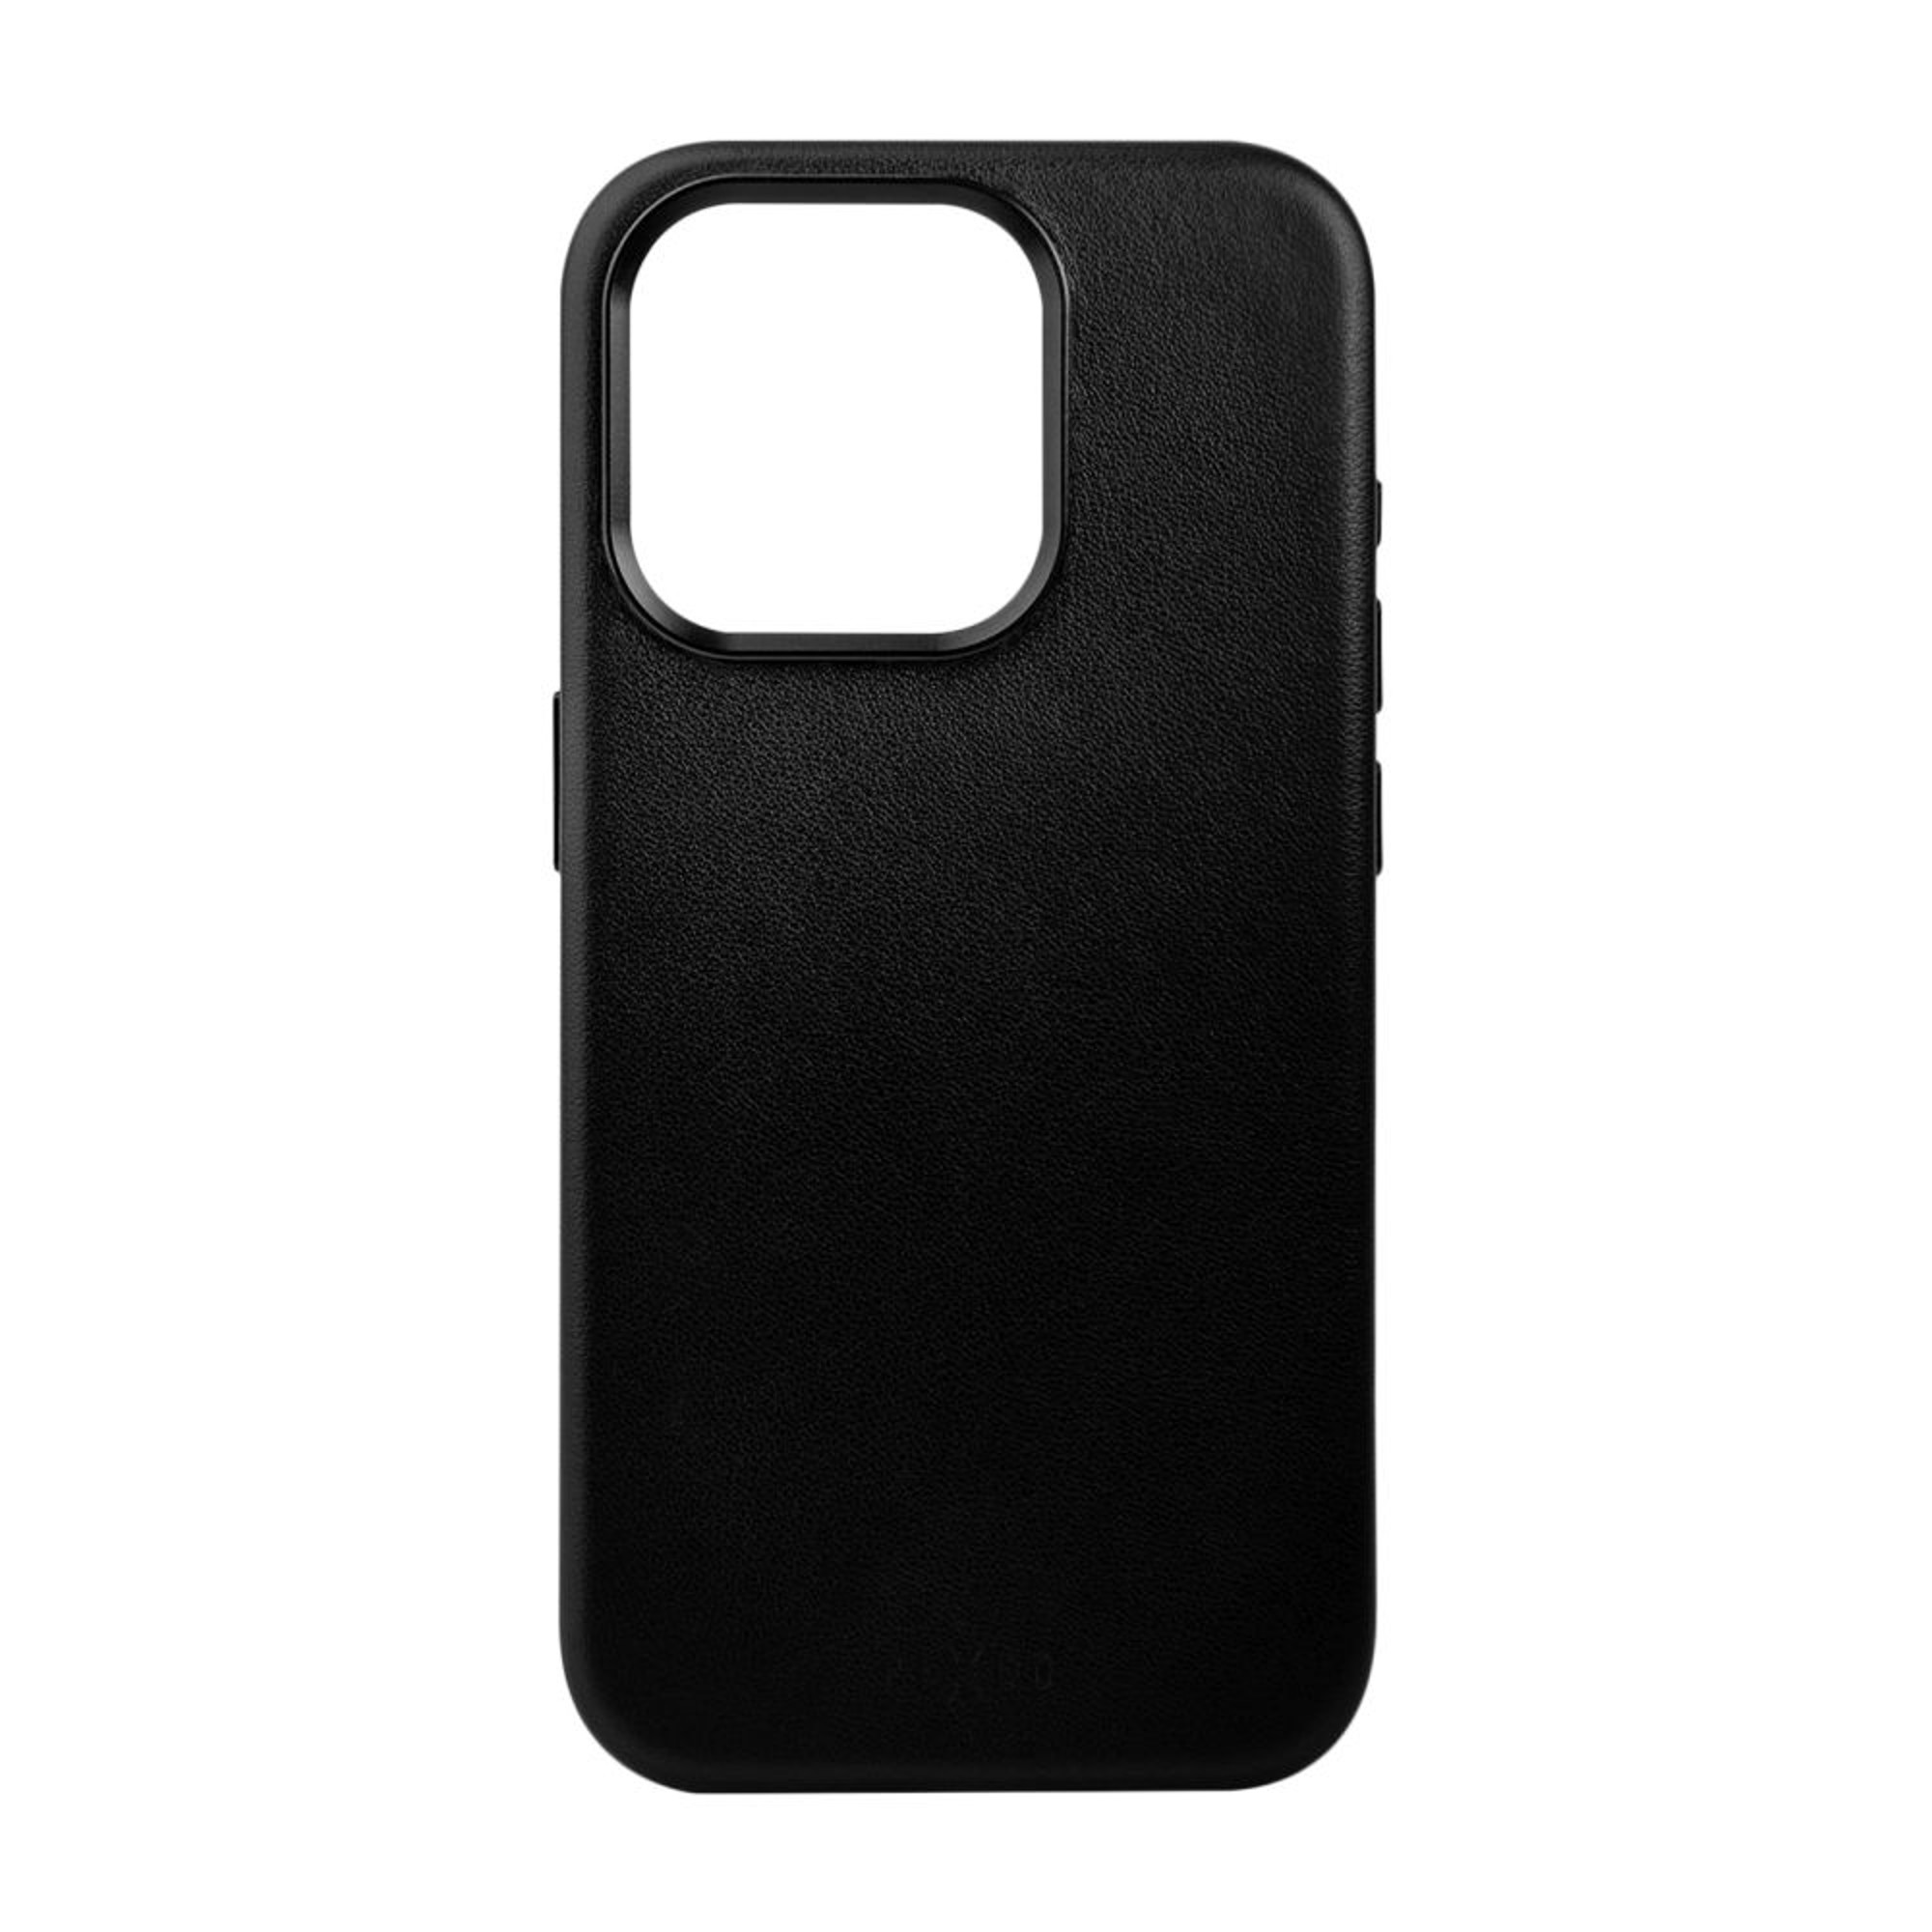 MagLeather Apple, FIXED Schwarz 15, Backcover, FIXLM-1200-BK, iPhone